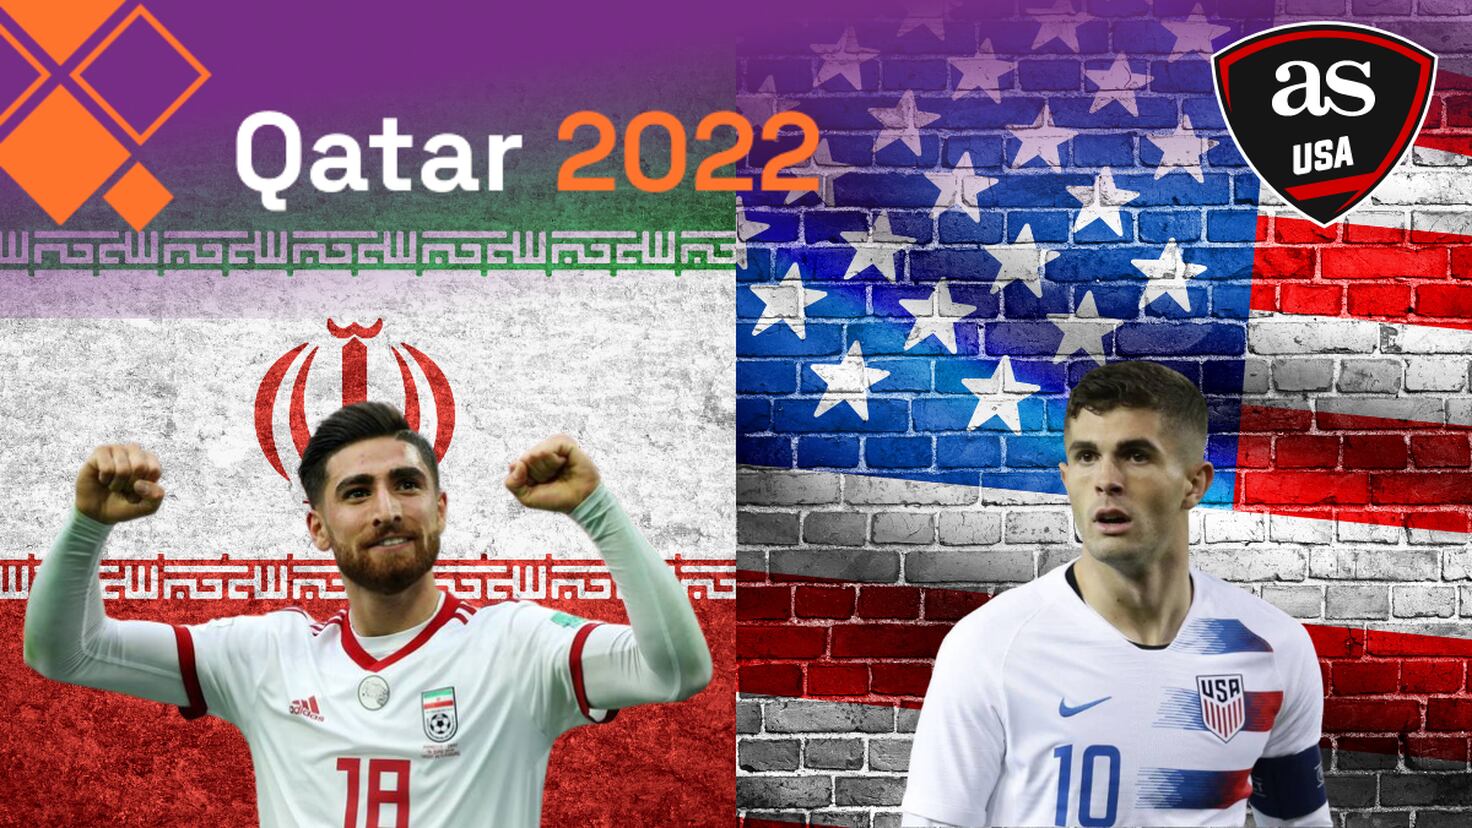 FIFA World Cup 2022: England, Iran, USA and Wales to fight it out